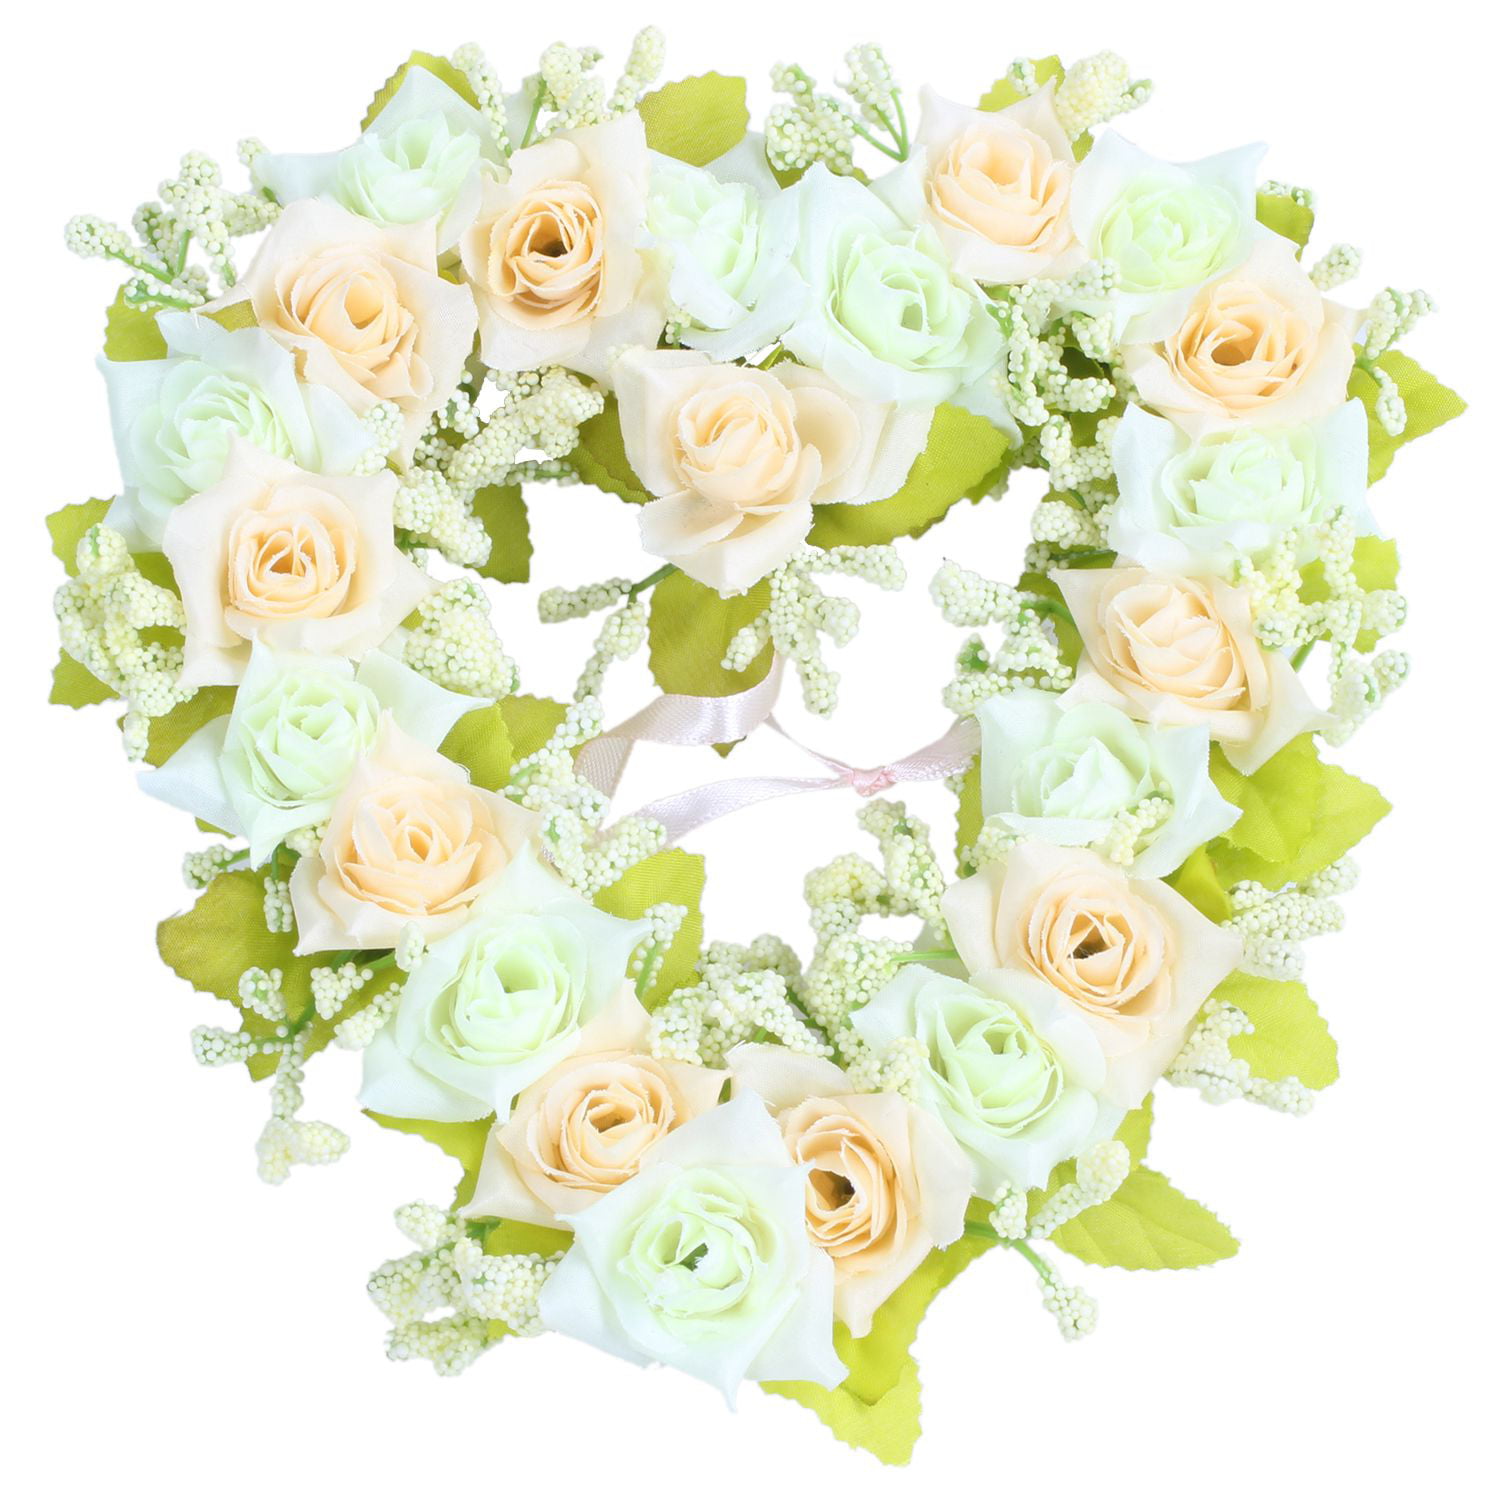 Dasing Heart Shaped Artificial Flower Wreath Door Decoration Hanging Wreaths with Silk Ribbon for Wedding Decoration（white） 22x21x3.5cm 